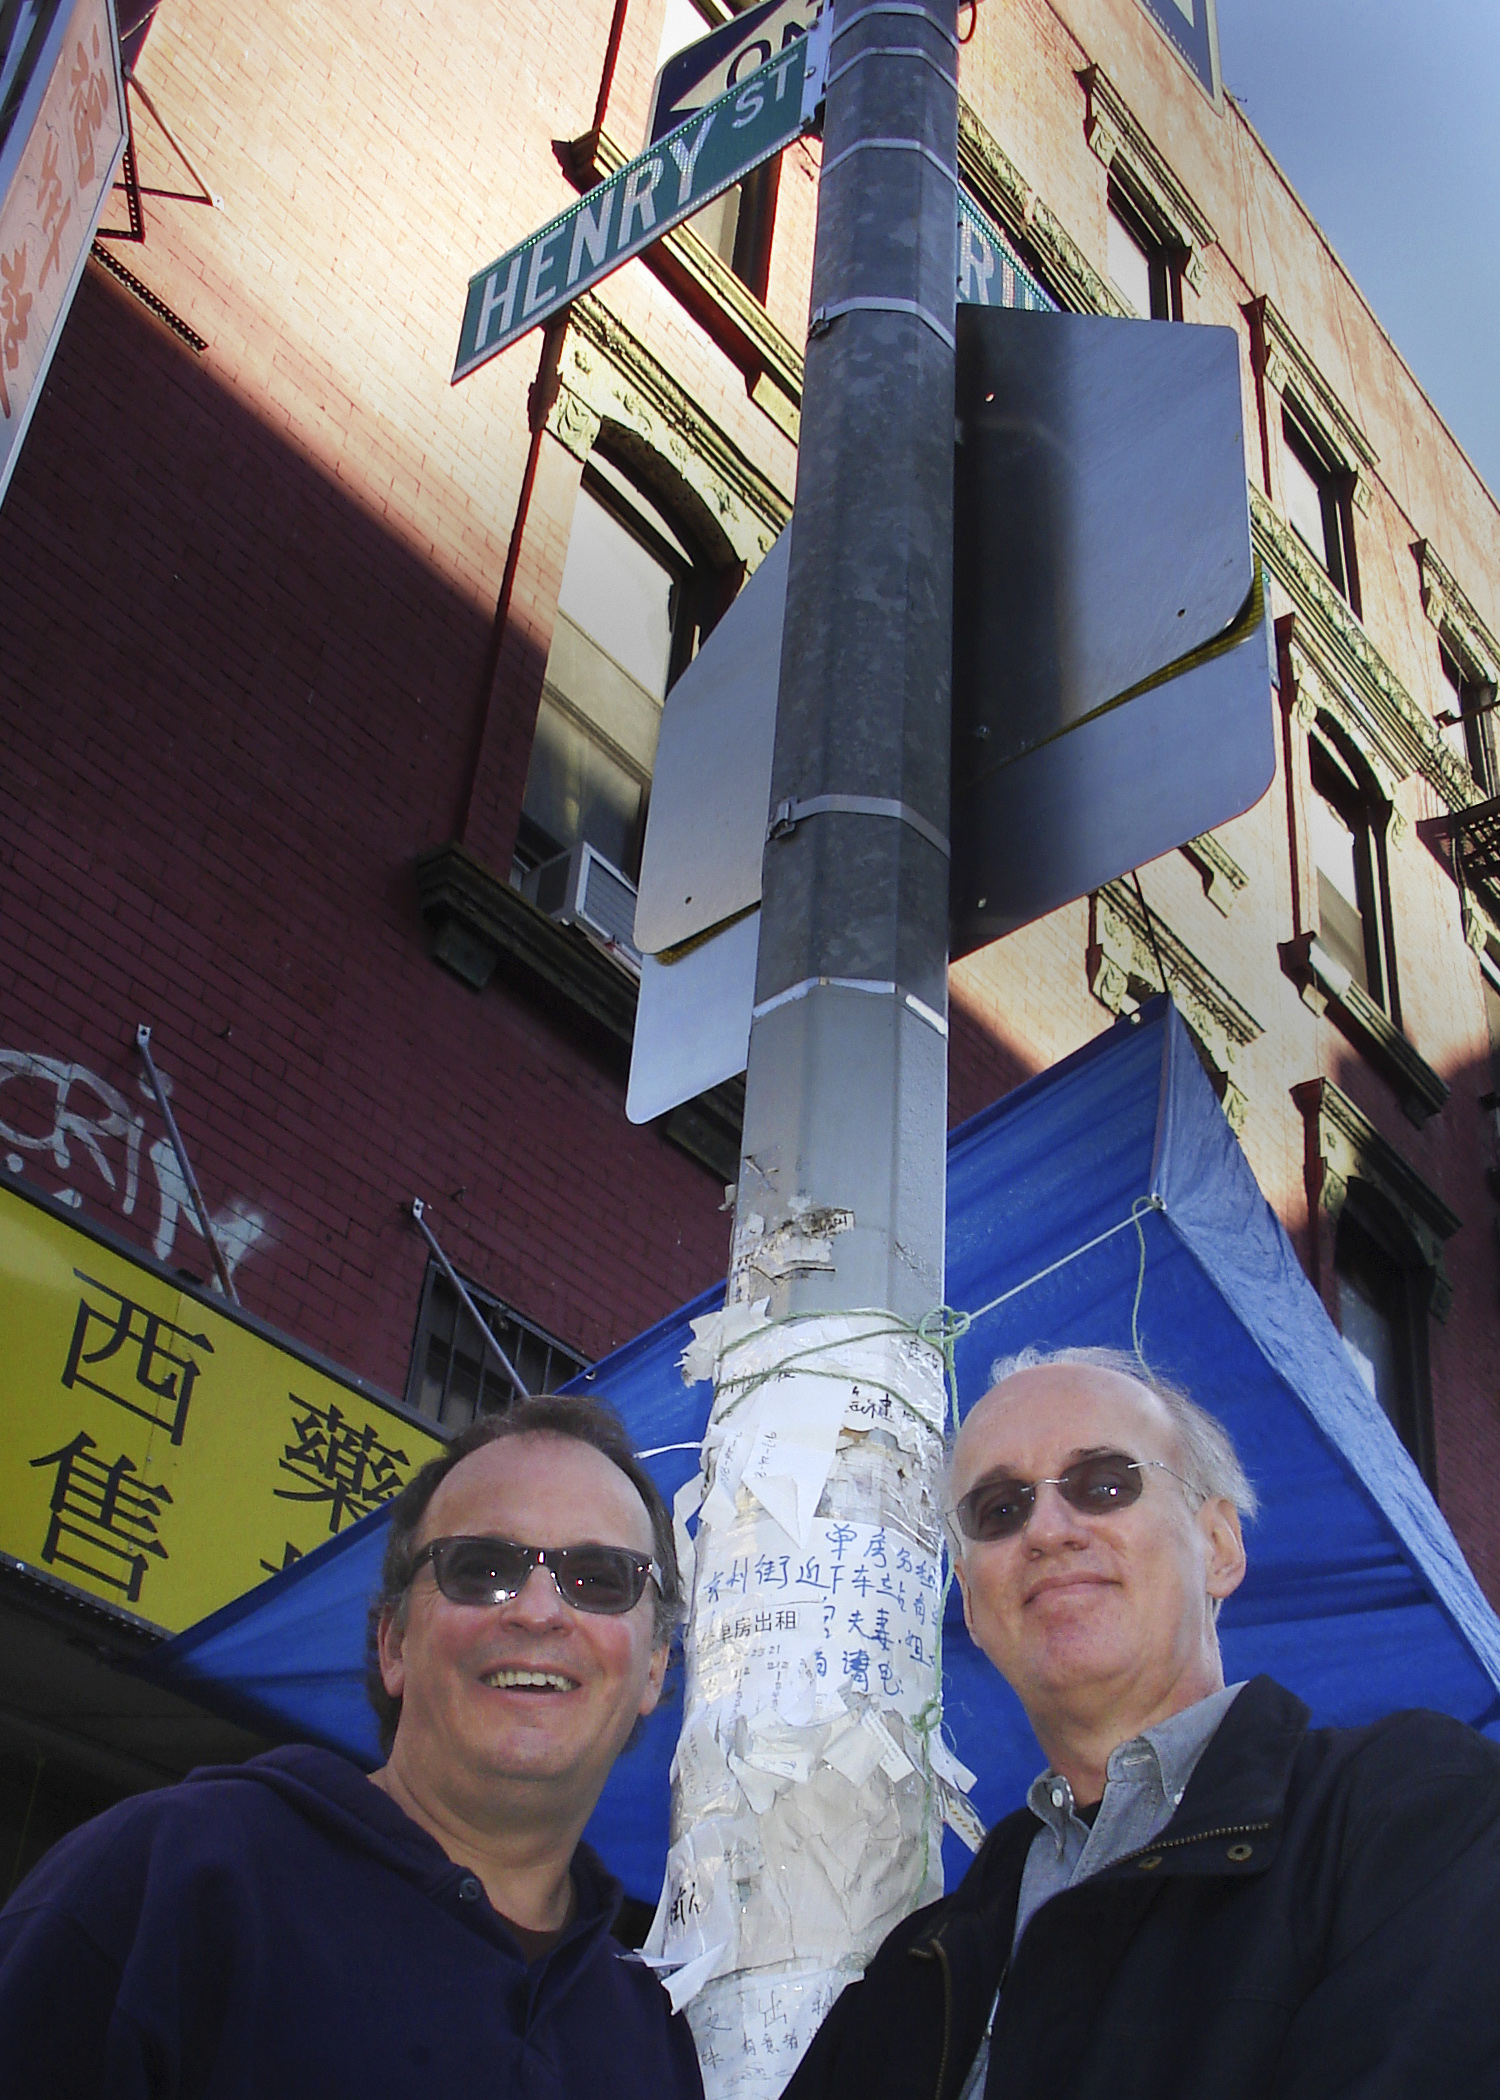 Phil Kline and Tom Steenland both wearing sunglasses and standing on opposite sides of a traffic pole on a city street corner.